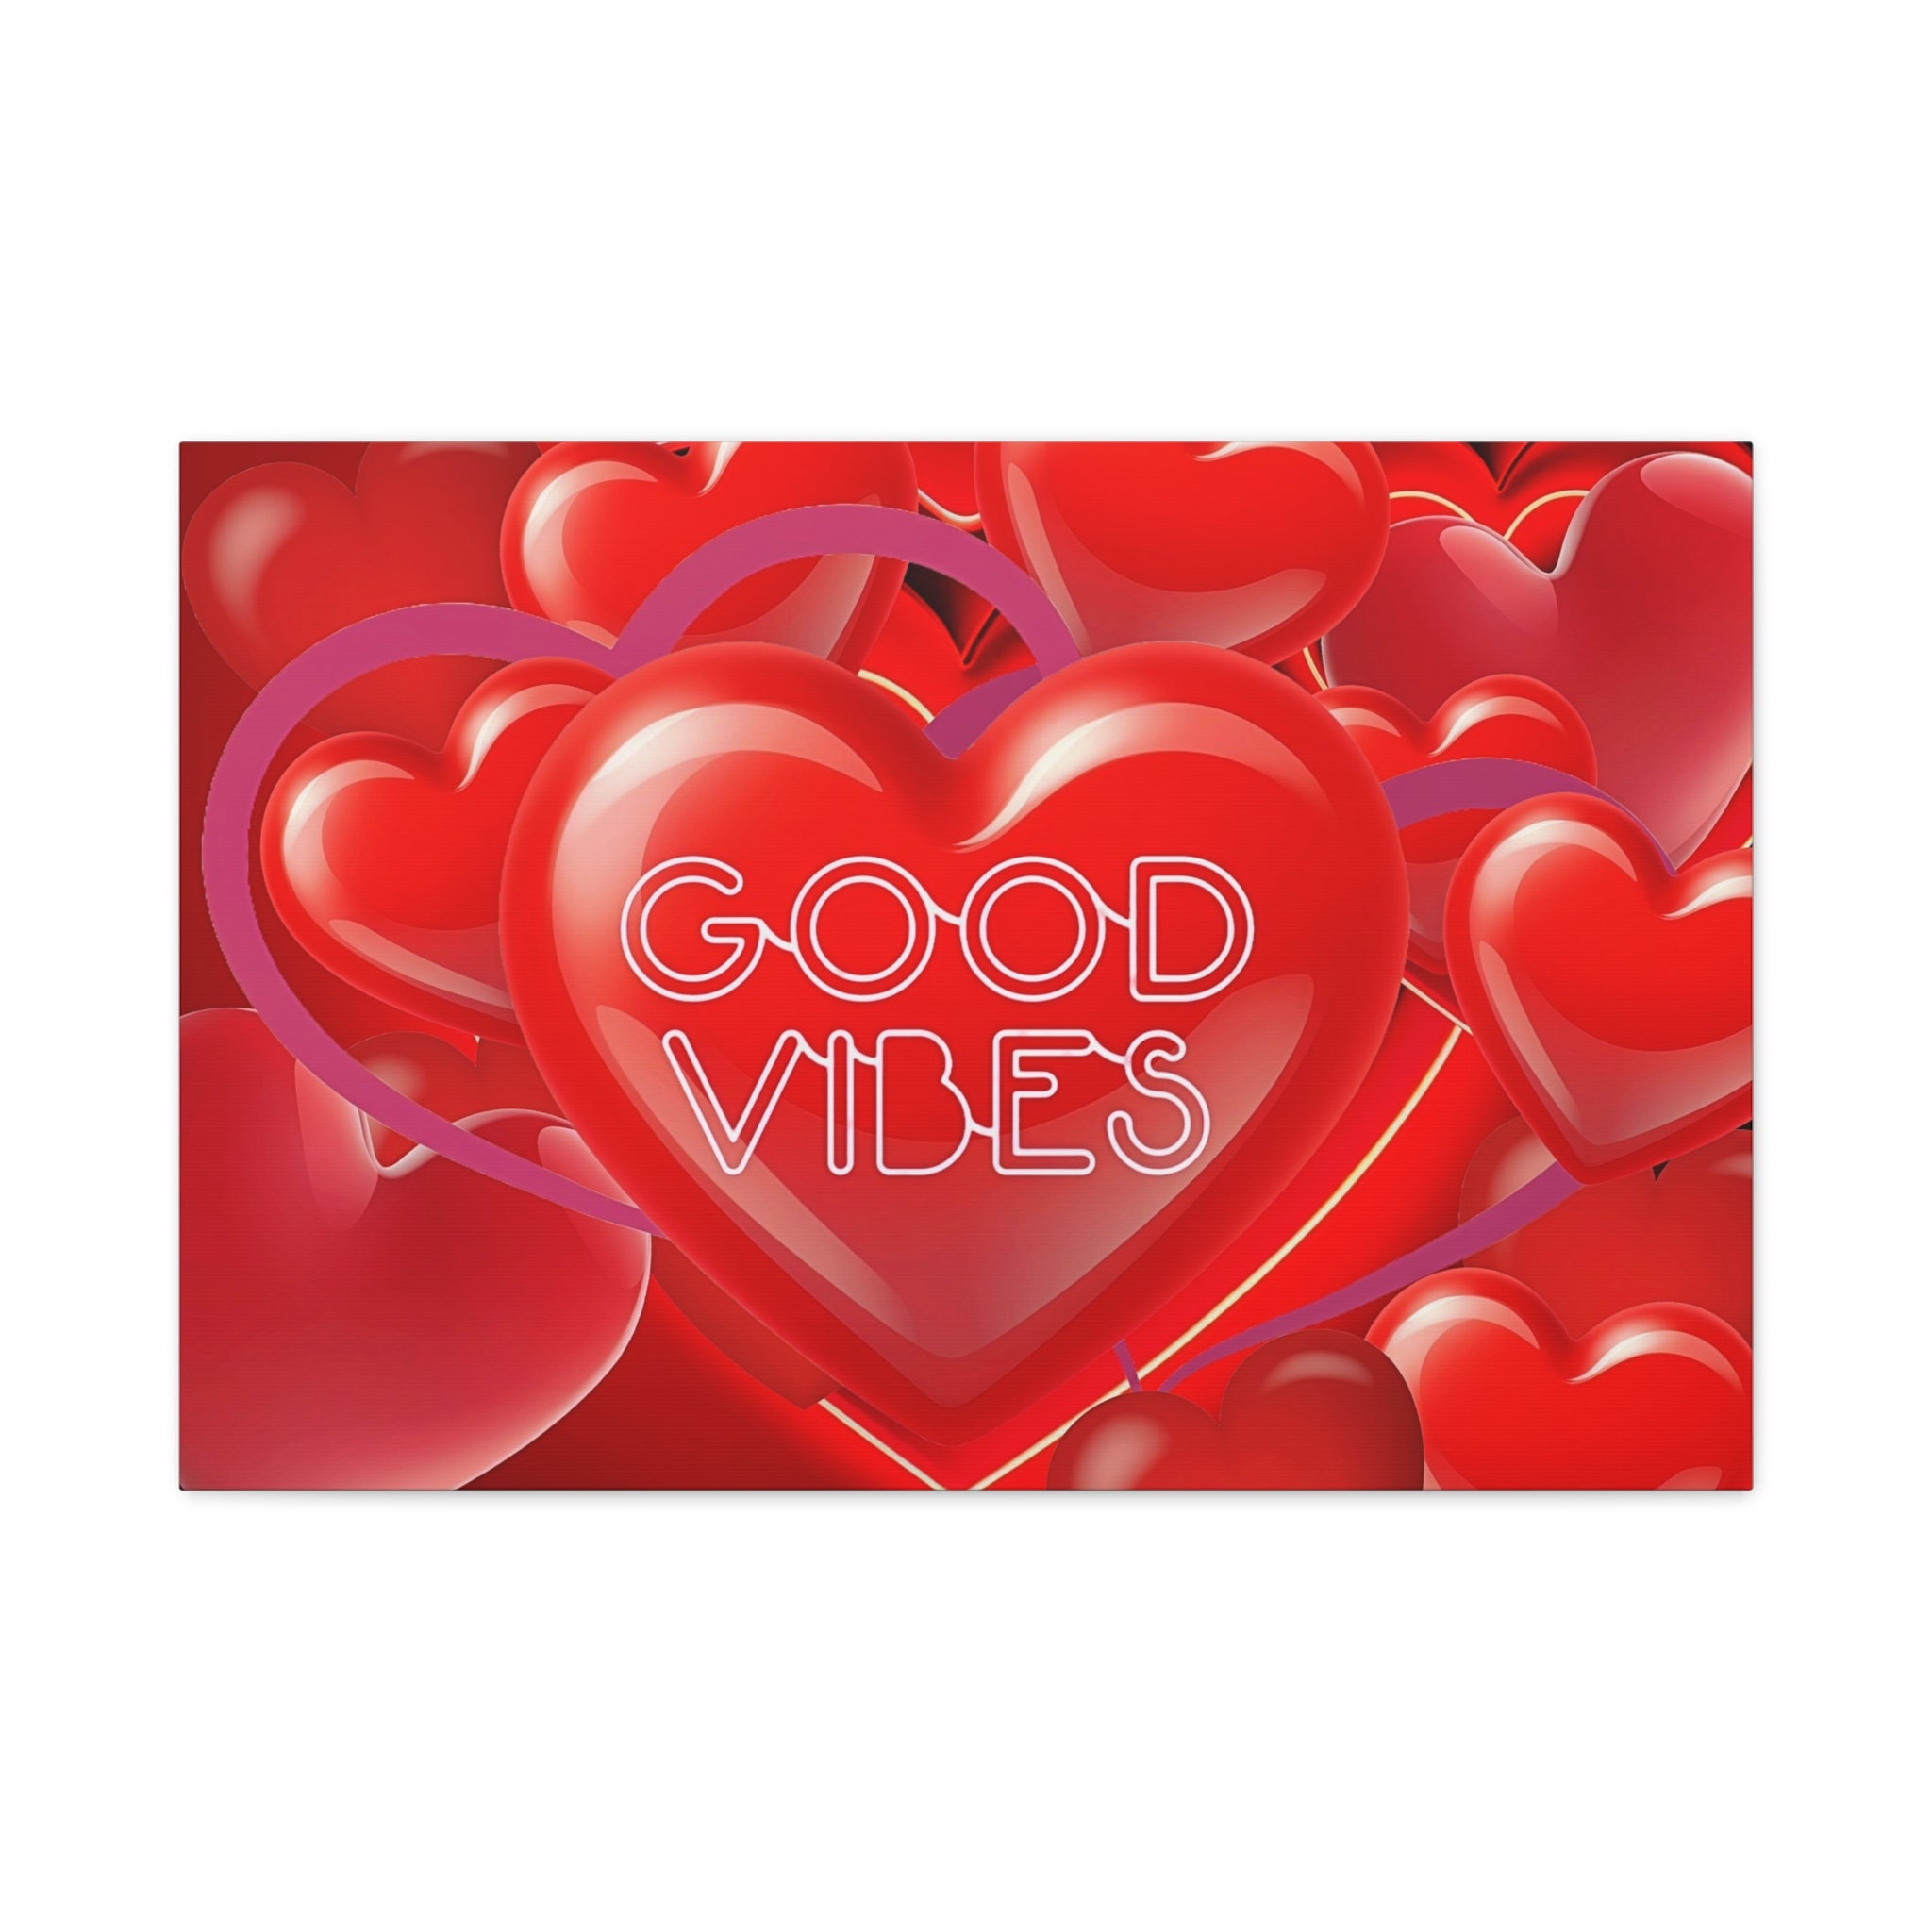 Wall Art GOOD VIBES Canvas Print Painting Original Giclee GW Love Nice Heart Beauty Fun Design Fit Hot House Home Office Gift Ready Hang Living